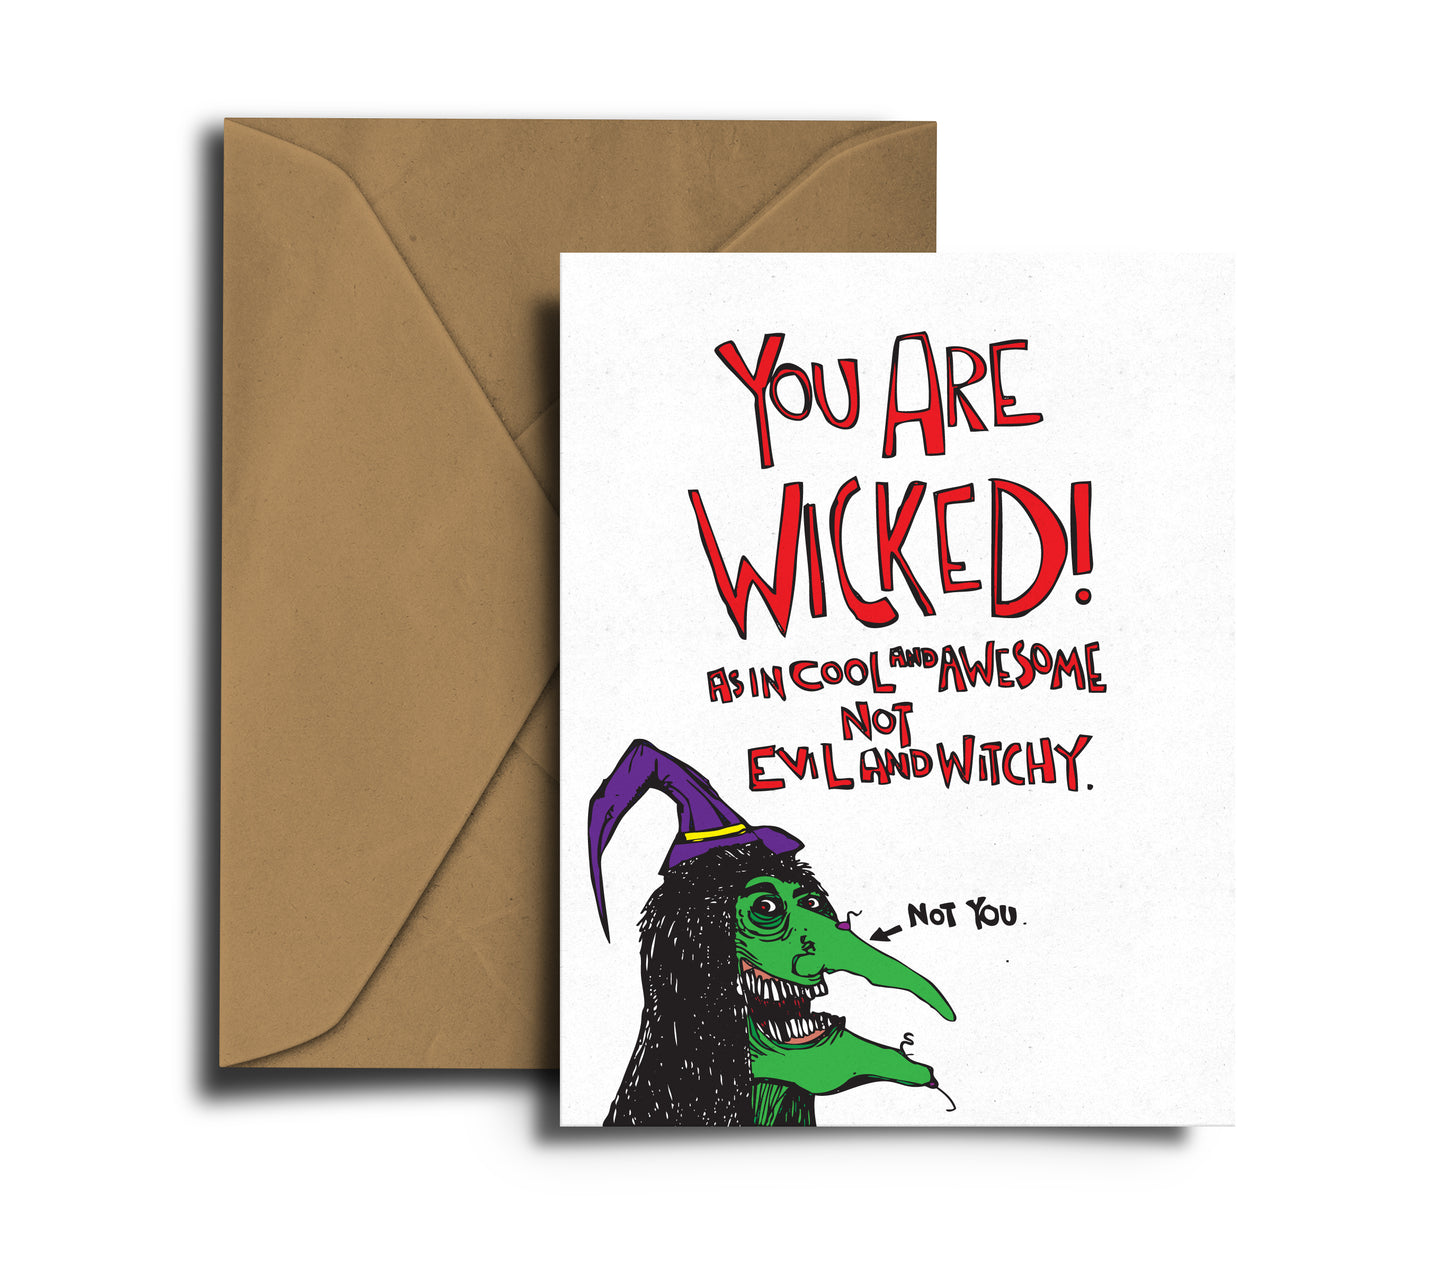 You are Wicked!